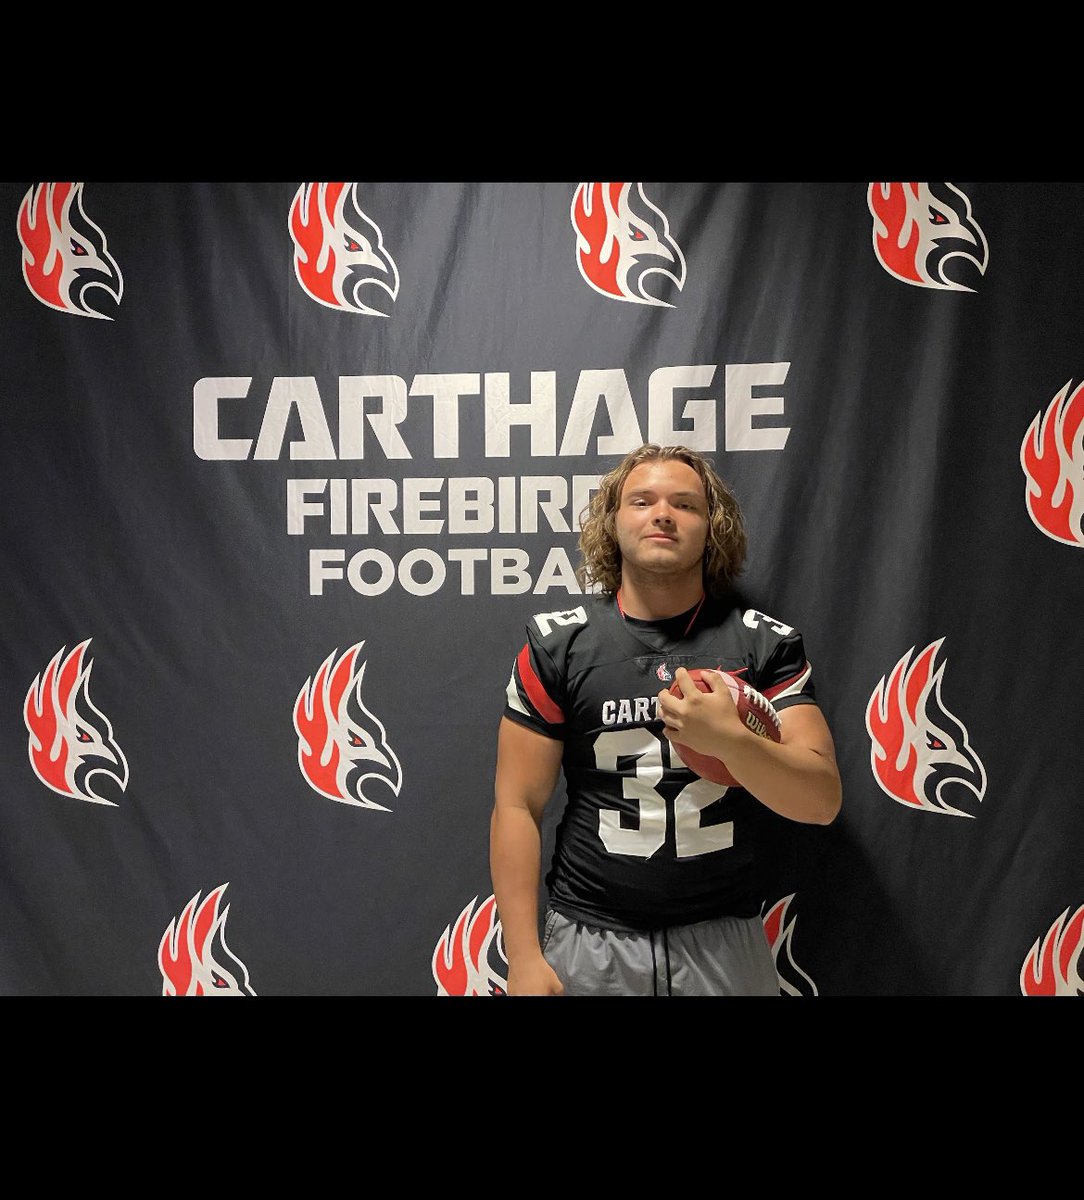 Had a great time @Carthage_FB for a junior day! Thanks @CoachDustinHass for inviting me! @JacobIodence @SCNFBOFFICIAL @robertpomazak